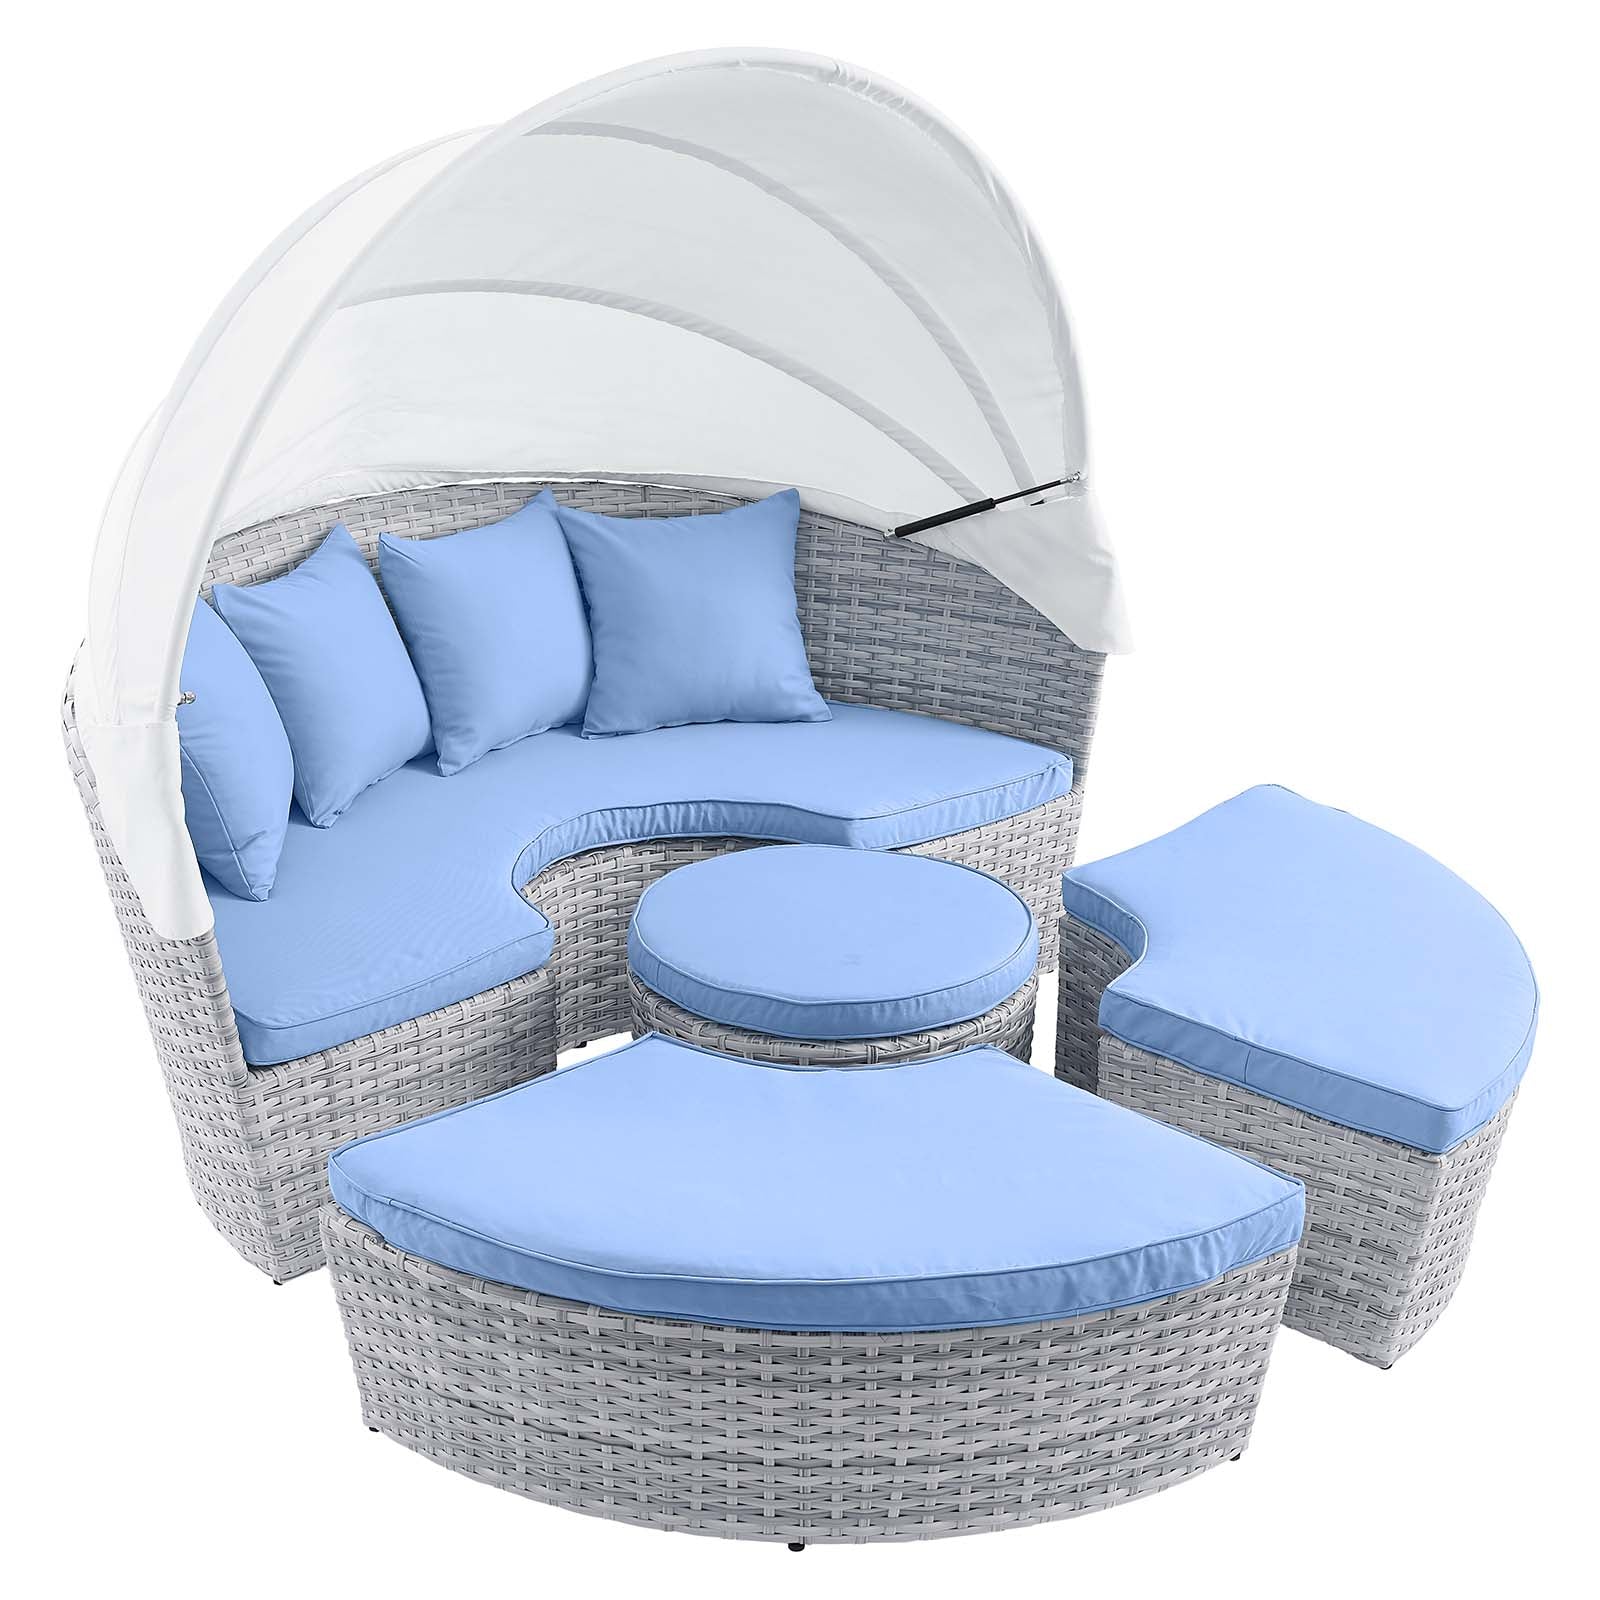 Modway Patio Daybeds - Scottsdale Canopy Outdoor Patio Daybed Light Gray Light Blue